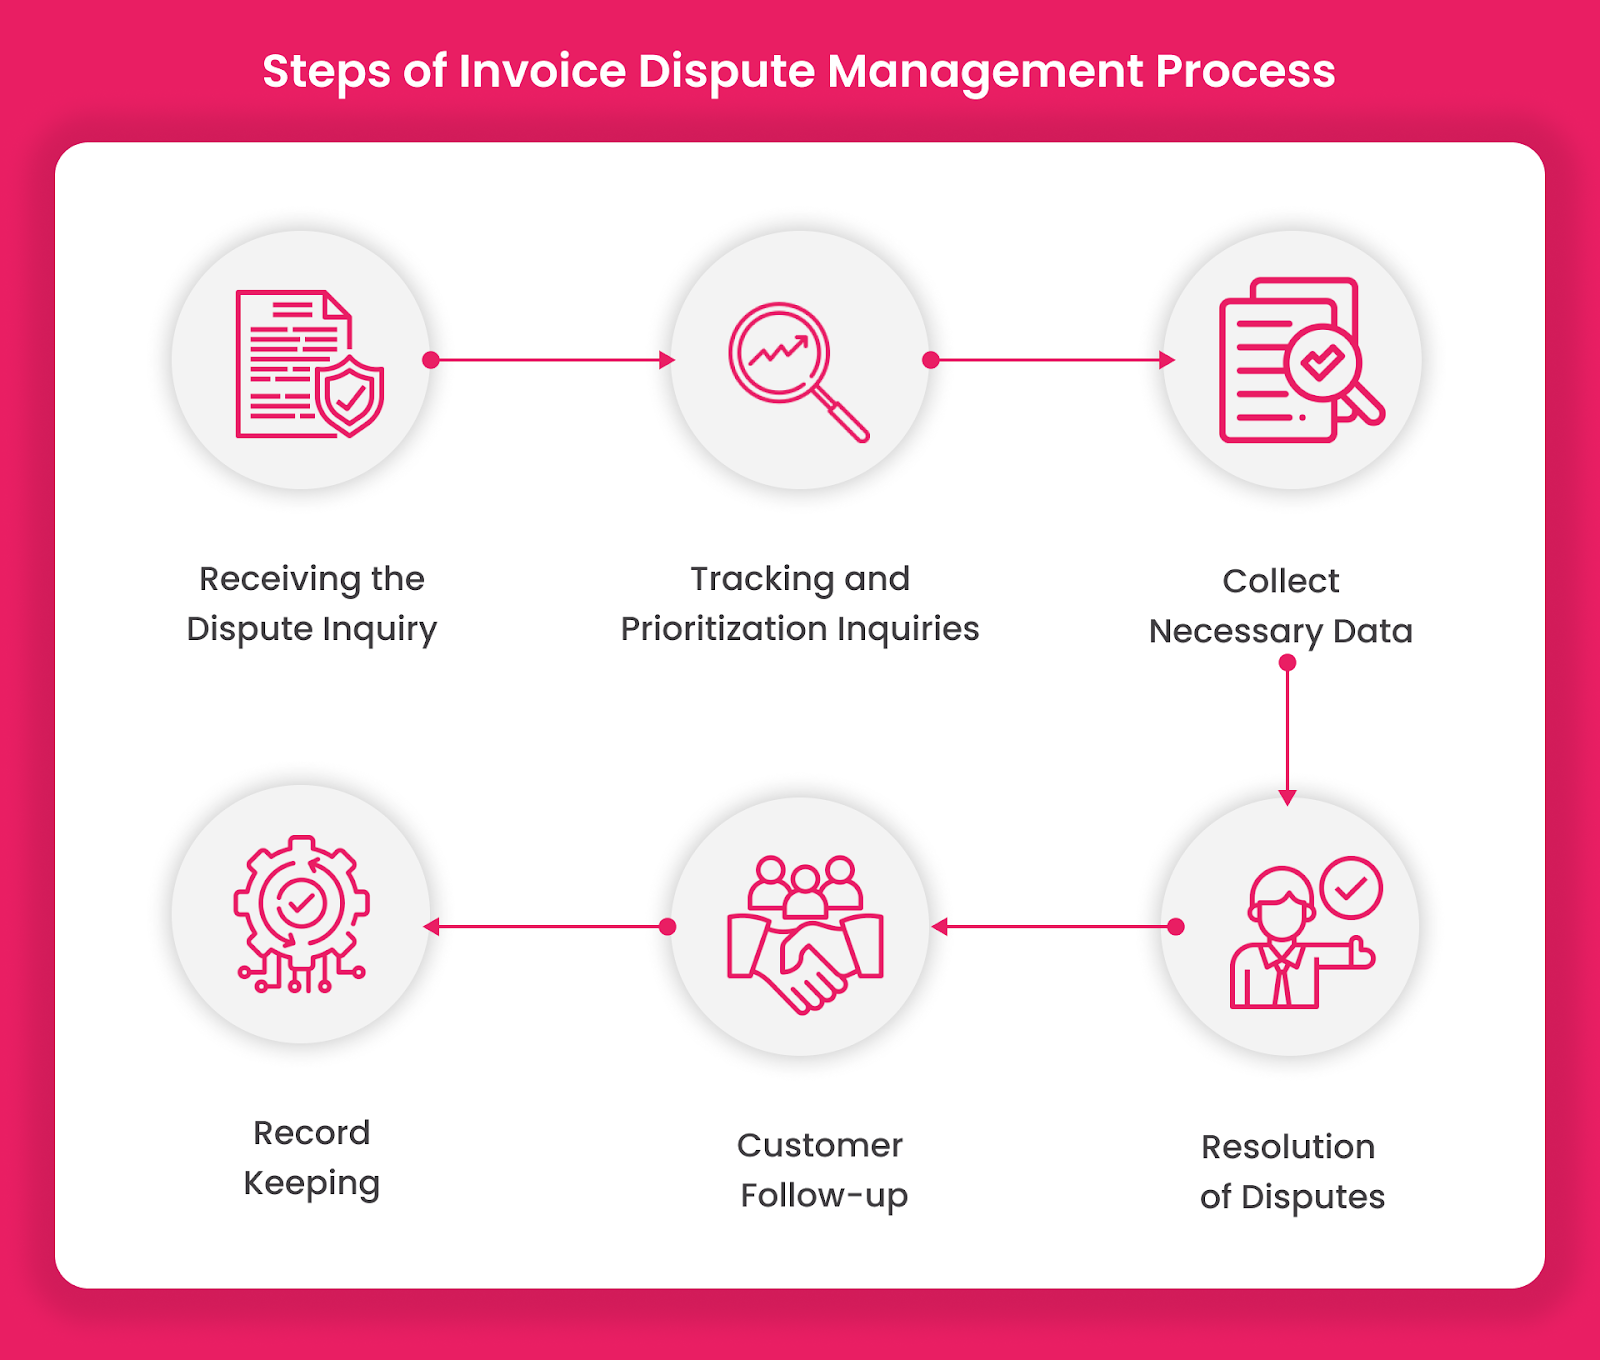 Steps of Invoice Dispute Management process